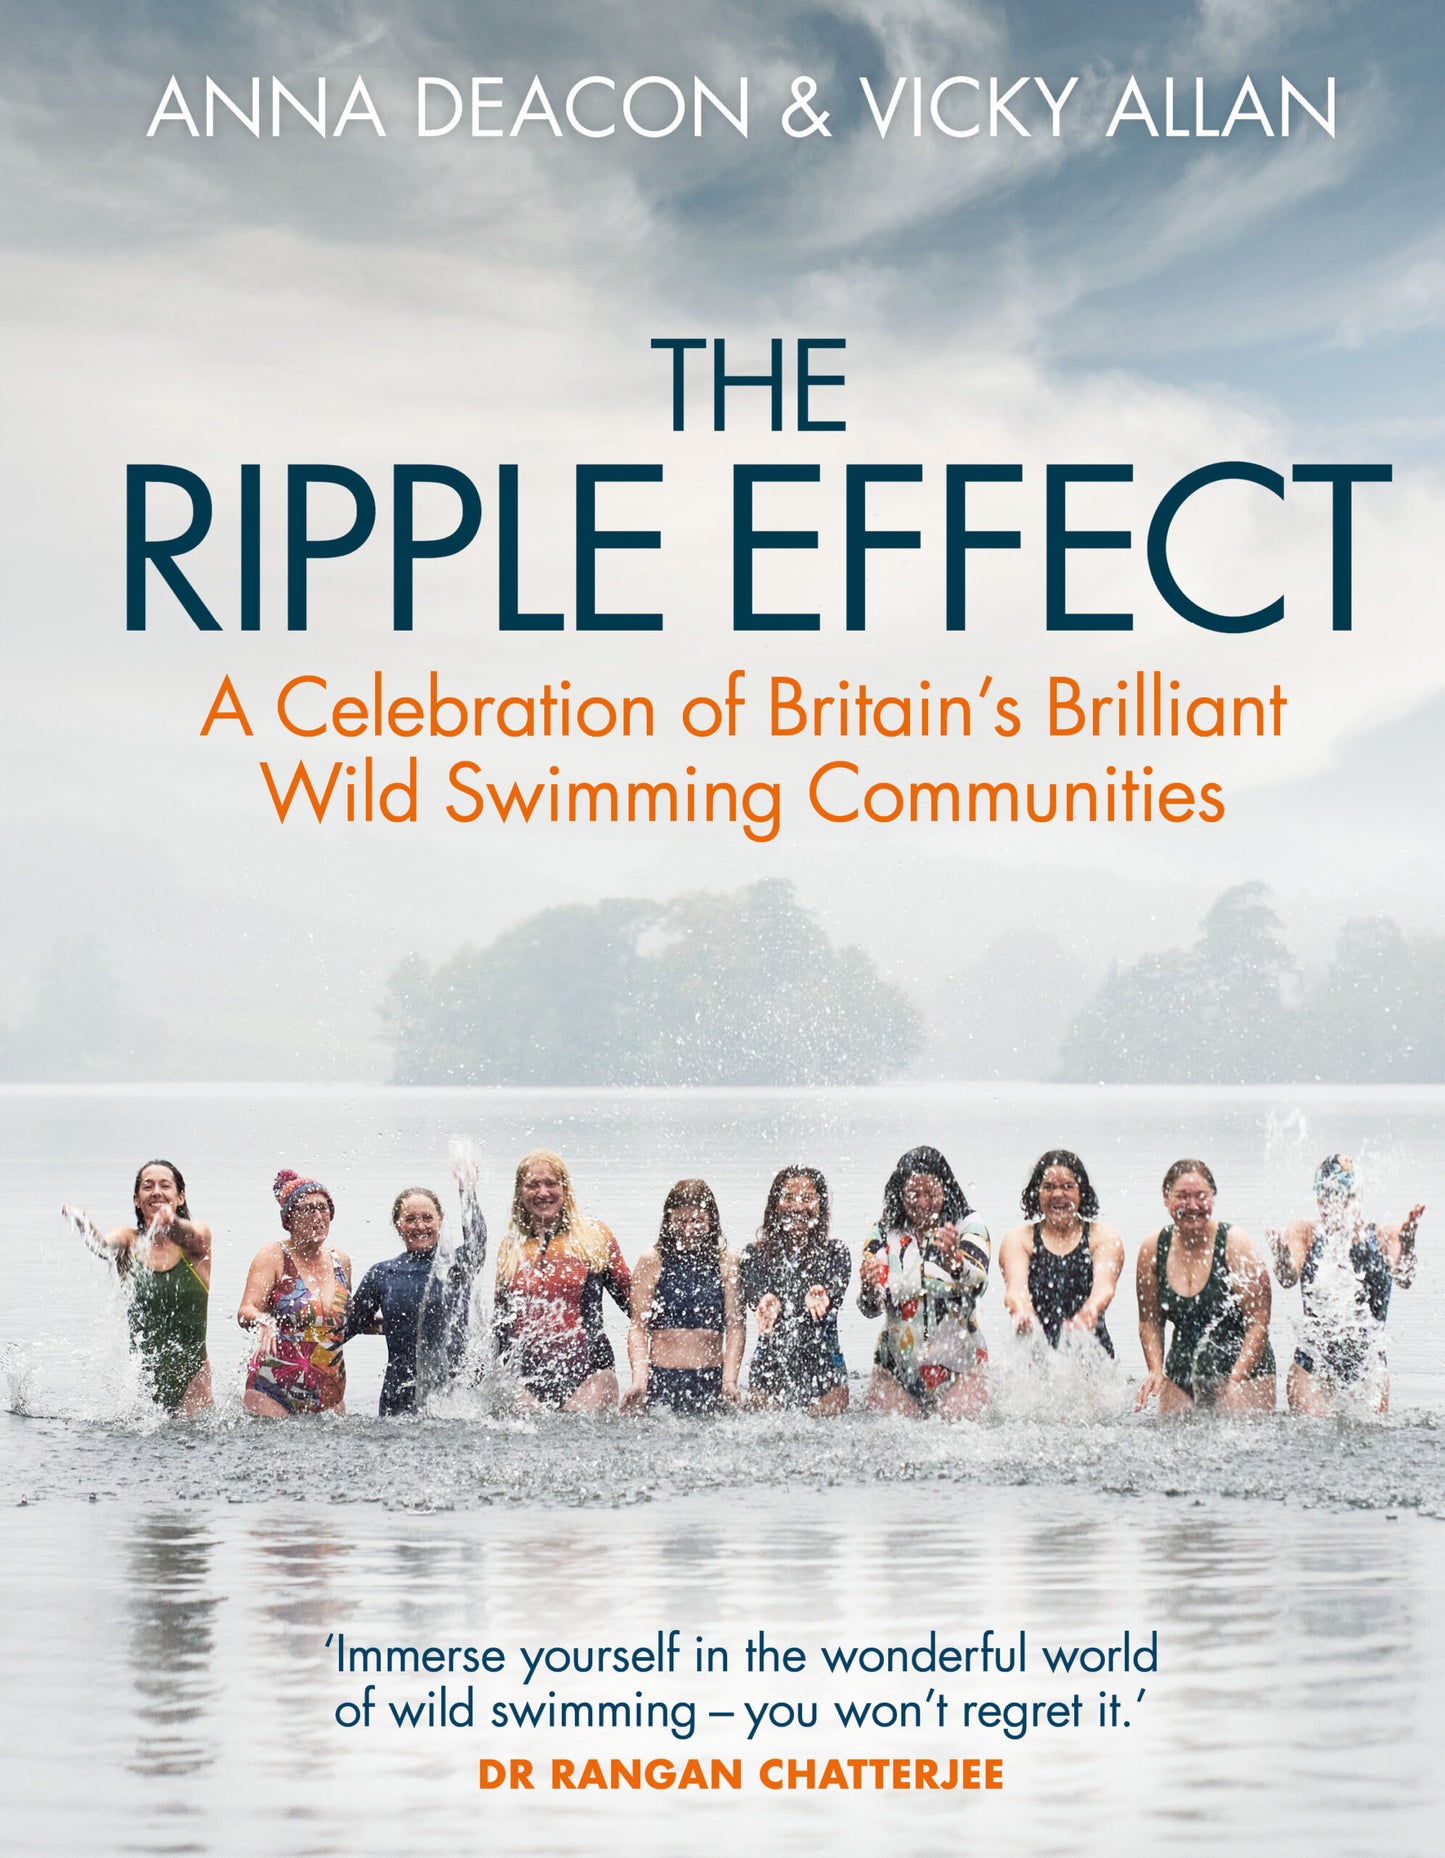 The Ripple Effect by Anna Deacon & Vicky Allan